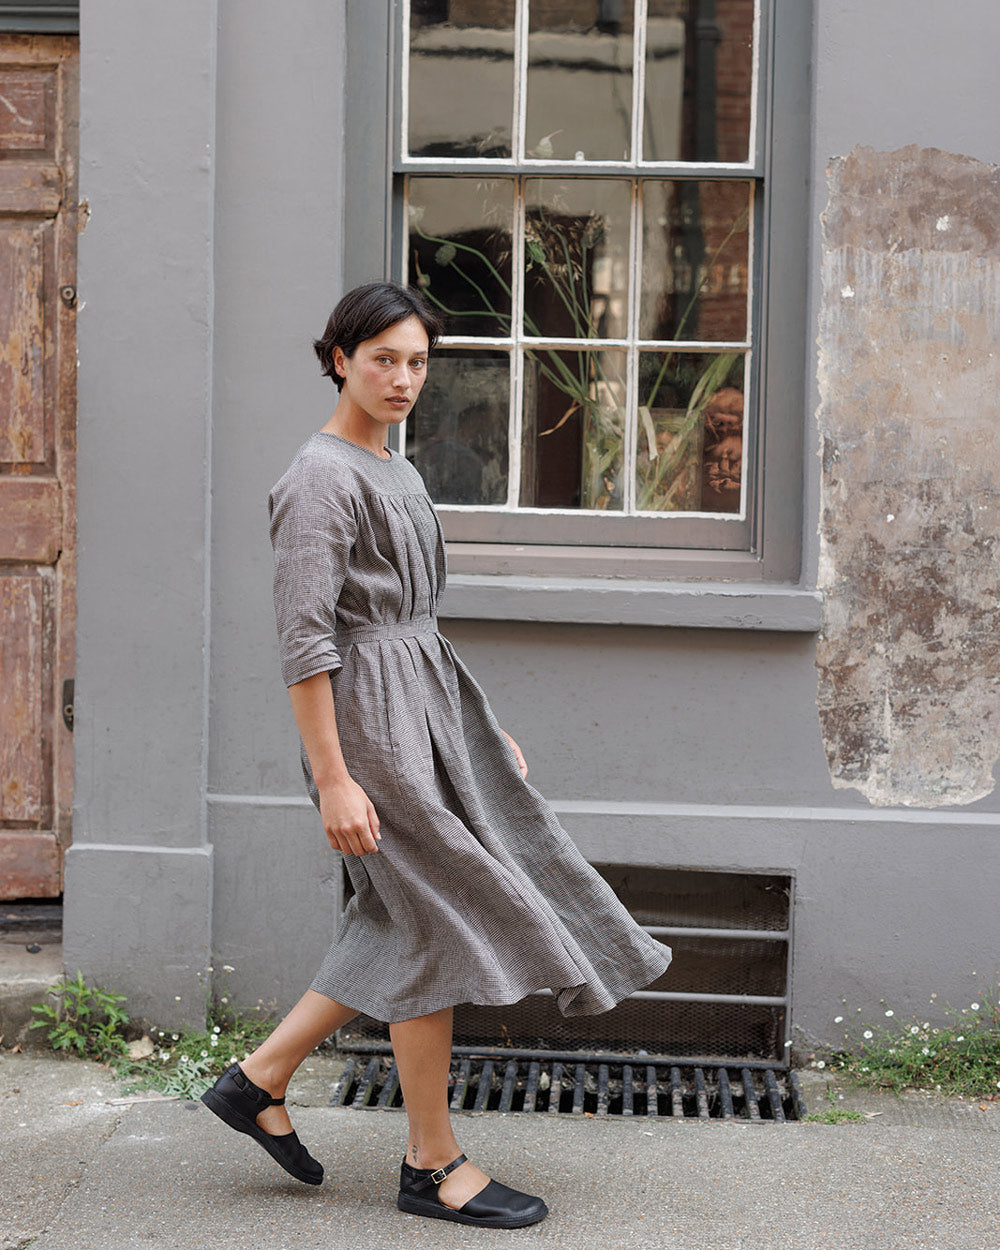 model in a loose, flowing black check linen dress walks past old, georgian house